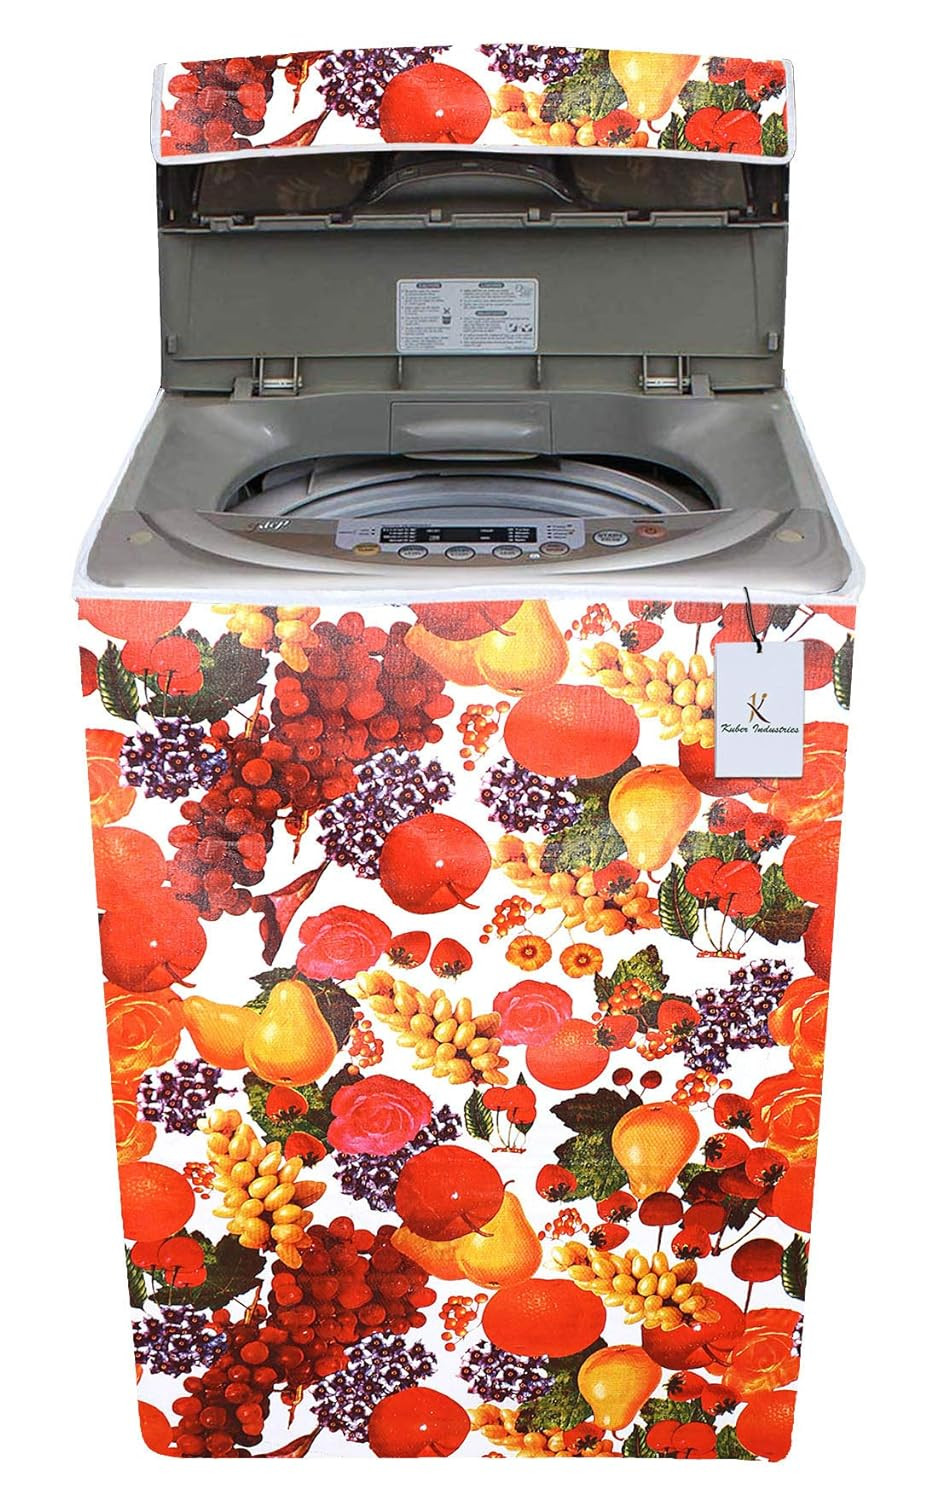 Kuber Industries Fruits Design PVC Top Load Fully Automatic Washing Machine Cover (Red & White) CTKTC33329